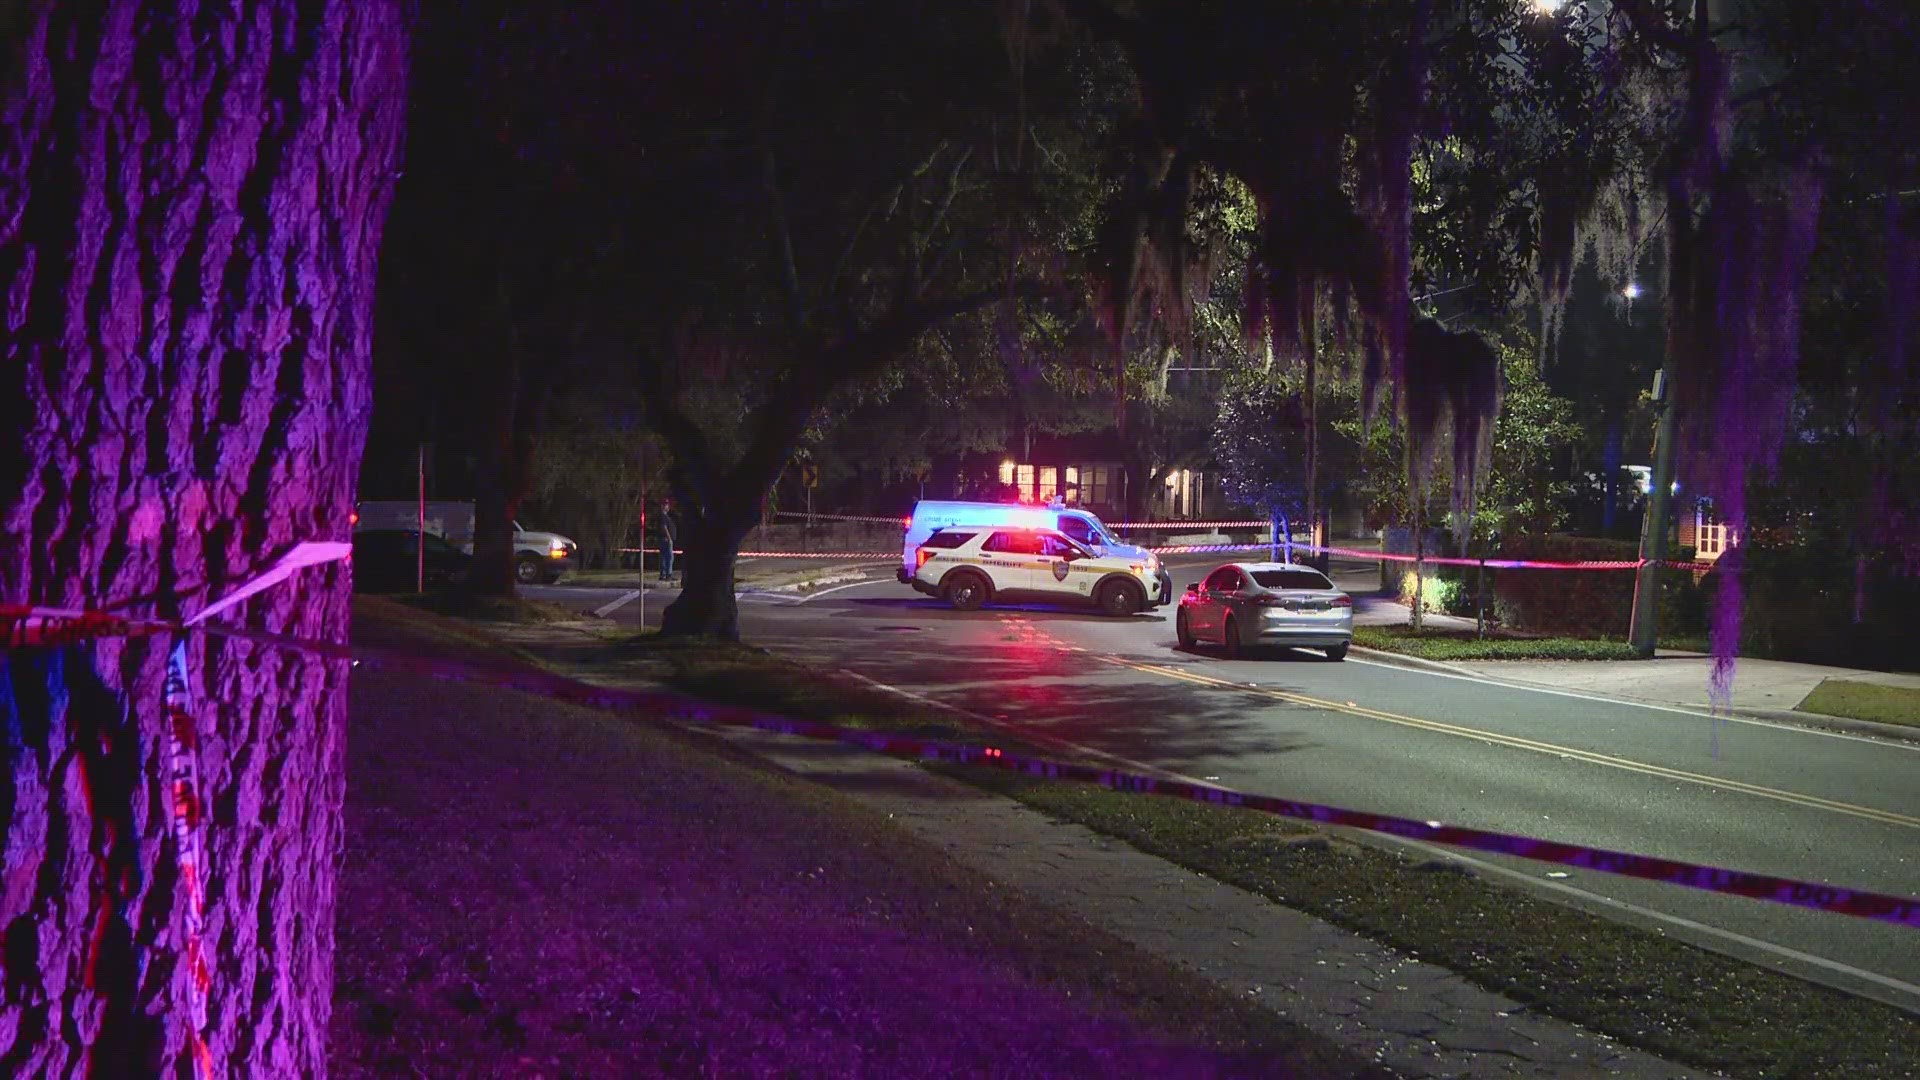 Jacksonville police say the man was found lying in the street on St. Johns Avenue with multiple gunshot wounds. First responders pronounced him dead at the scene.